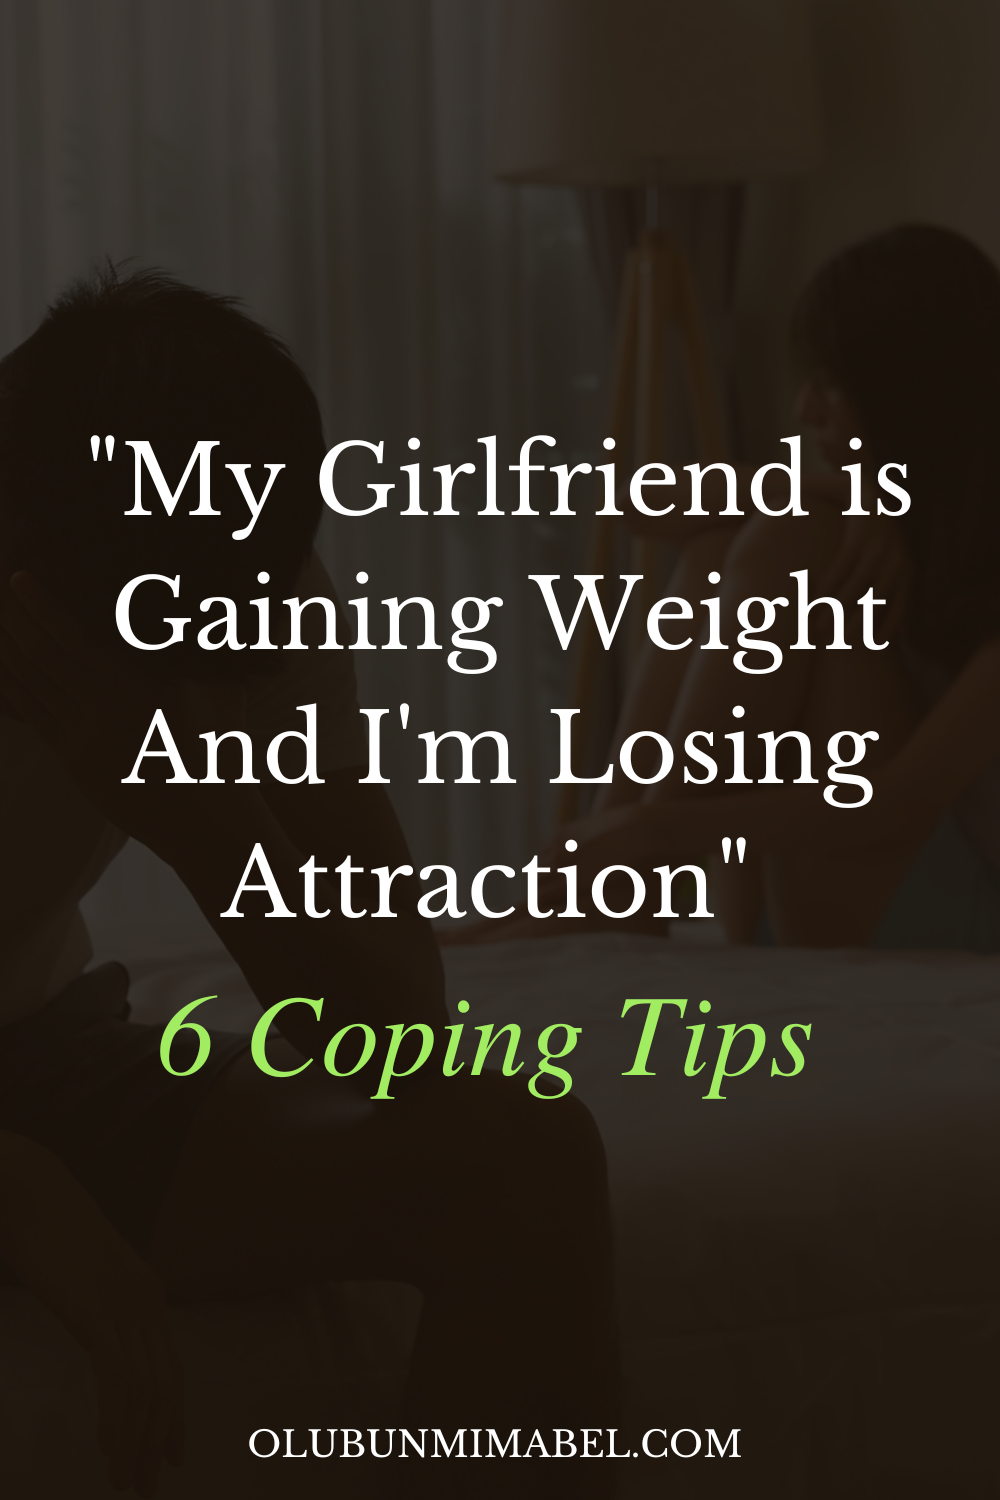 My Girlfriend is Gaining Weight And I’m Losing Attraction